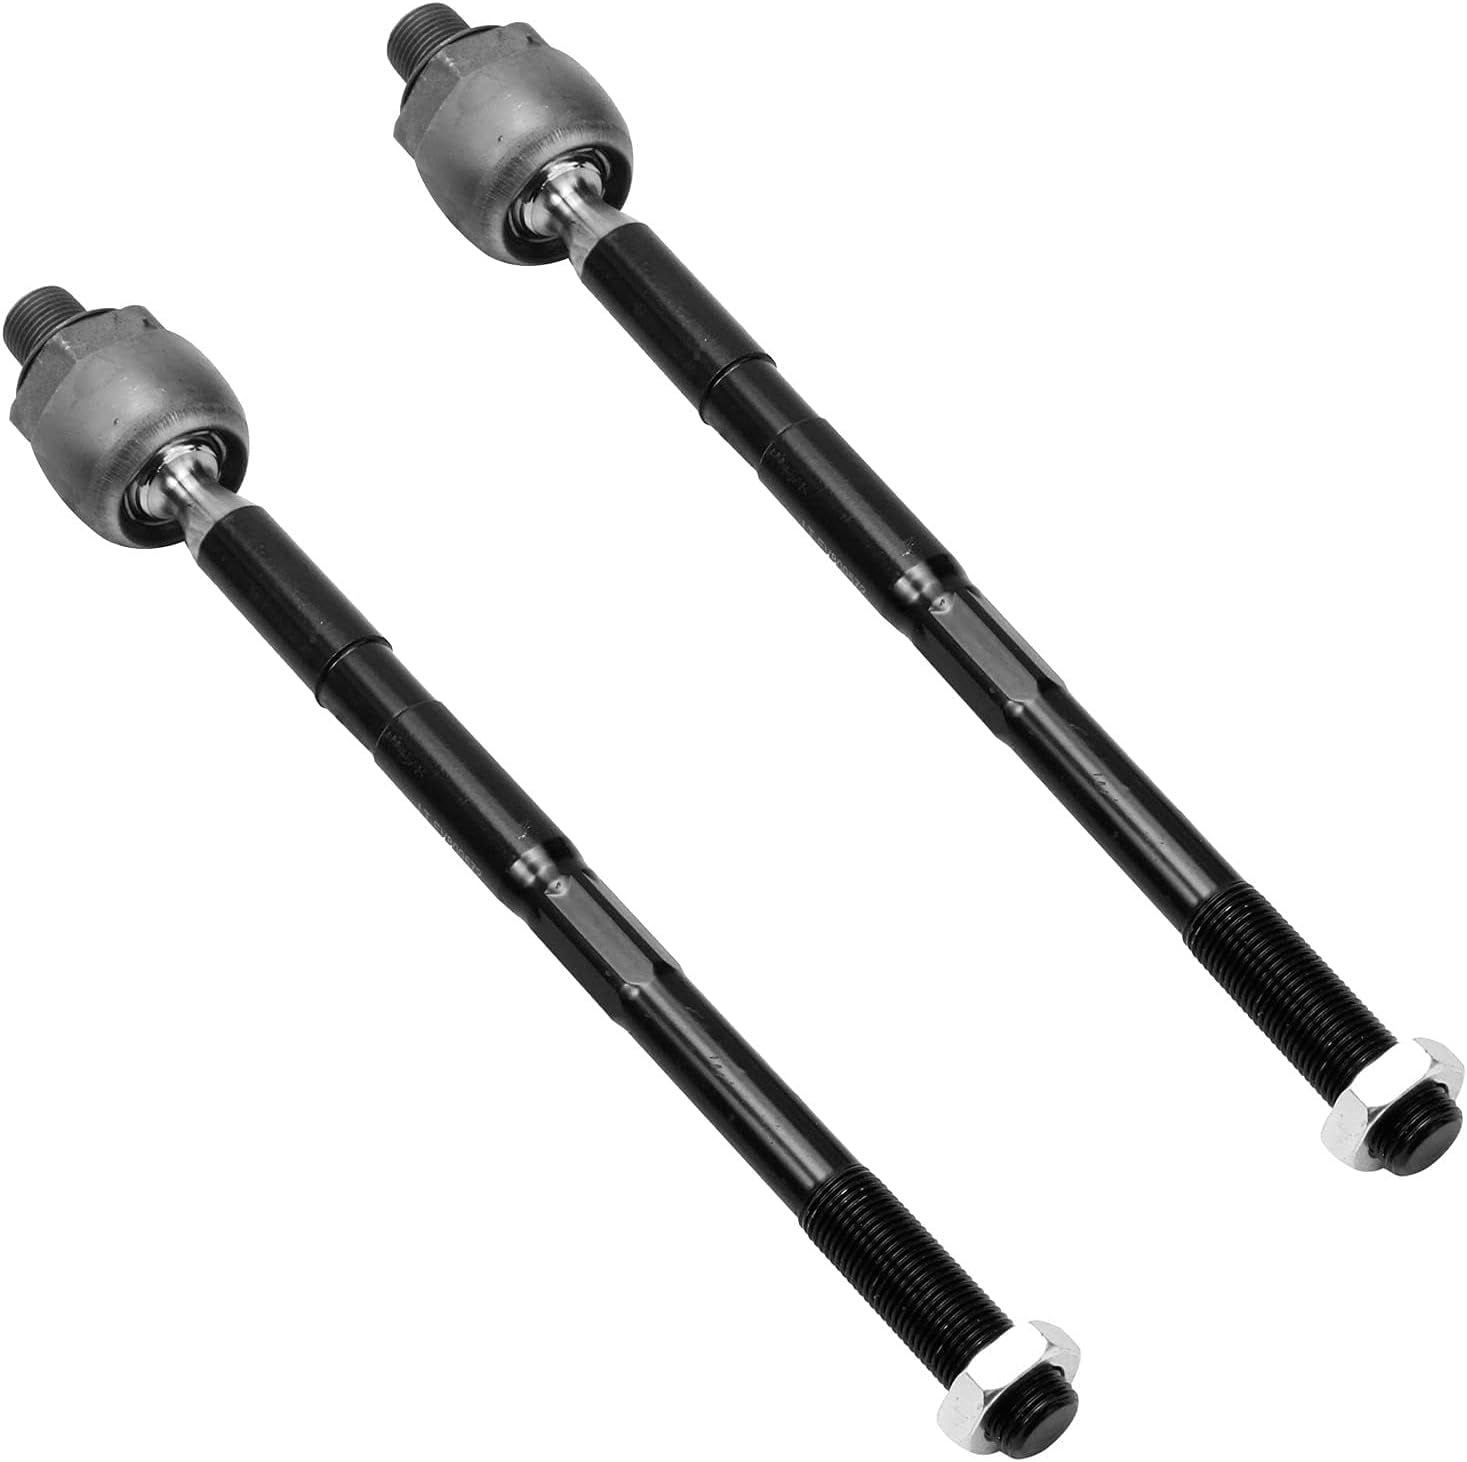 Detroit Axle - Front 8Pc Suspension Kit for Buick Enclave Chevrolet Traverse GMC Acadia Limited Saturn Outlook, 4 Tie Rod Ends 2 Sway Bars 2 Lower Ball Joints Replacement